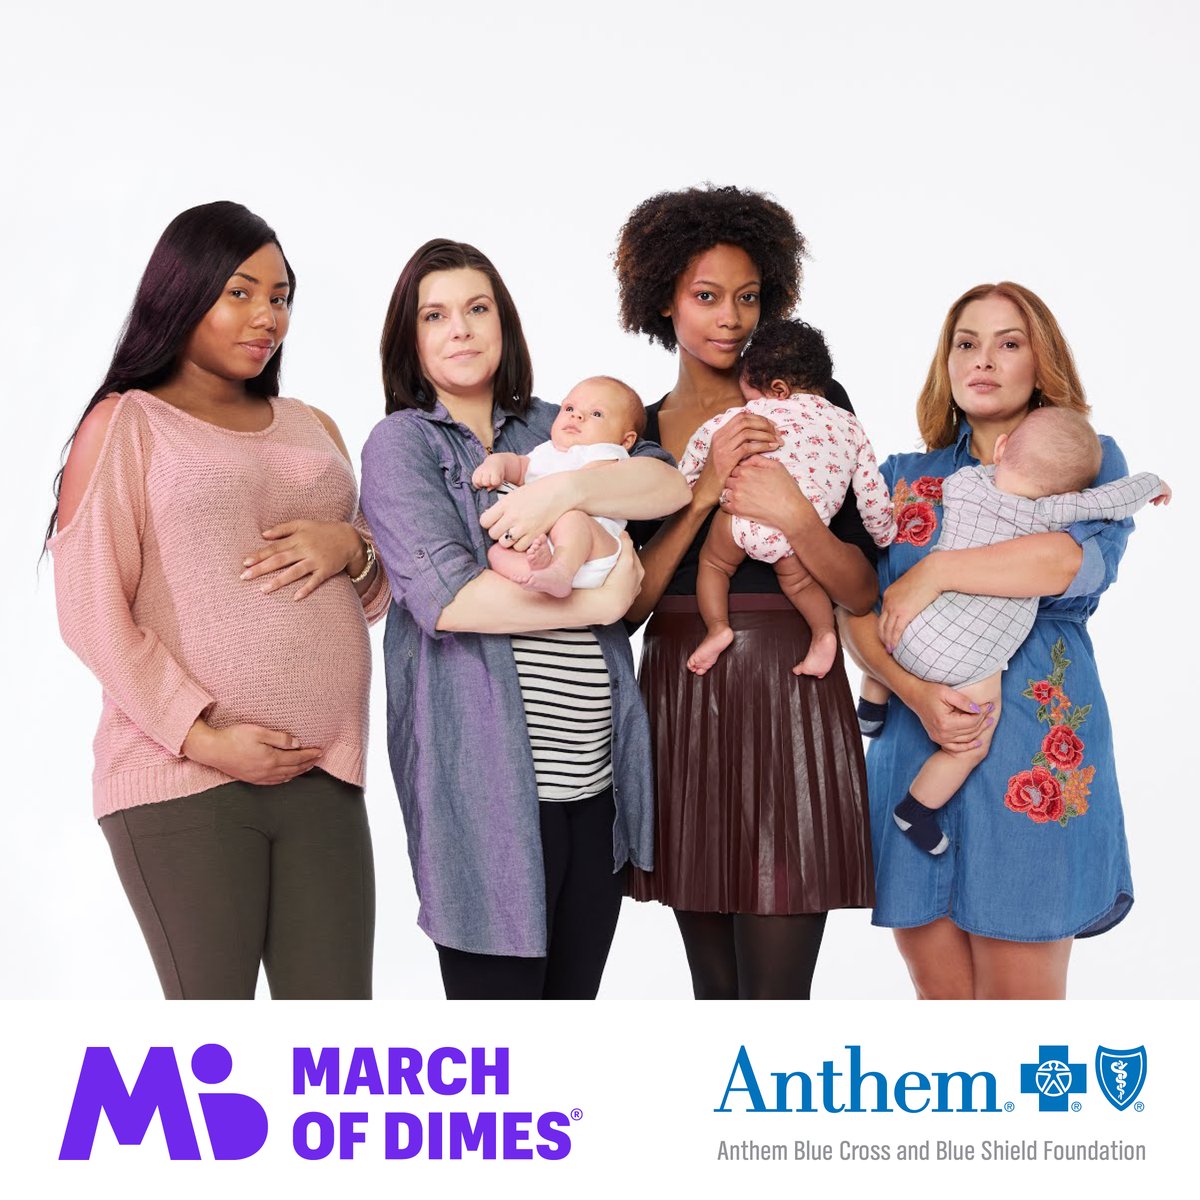 March of Dimes is proud to partner with @AnthemBCBS_News to support health equity partnerships in New Hampshire to ensure all moms have the healthiest pregnancy possible.